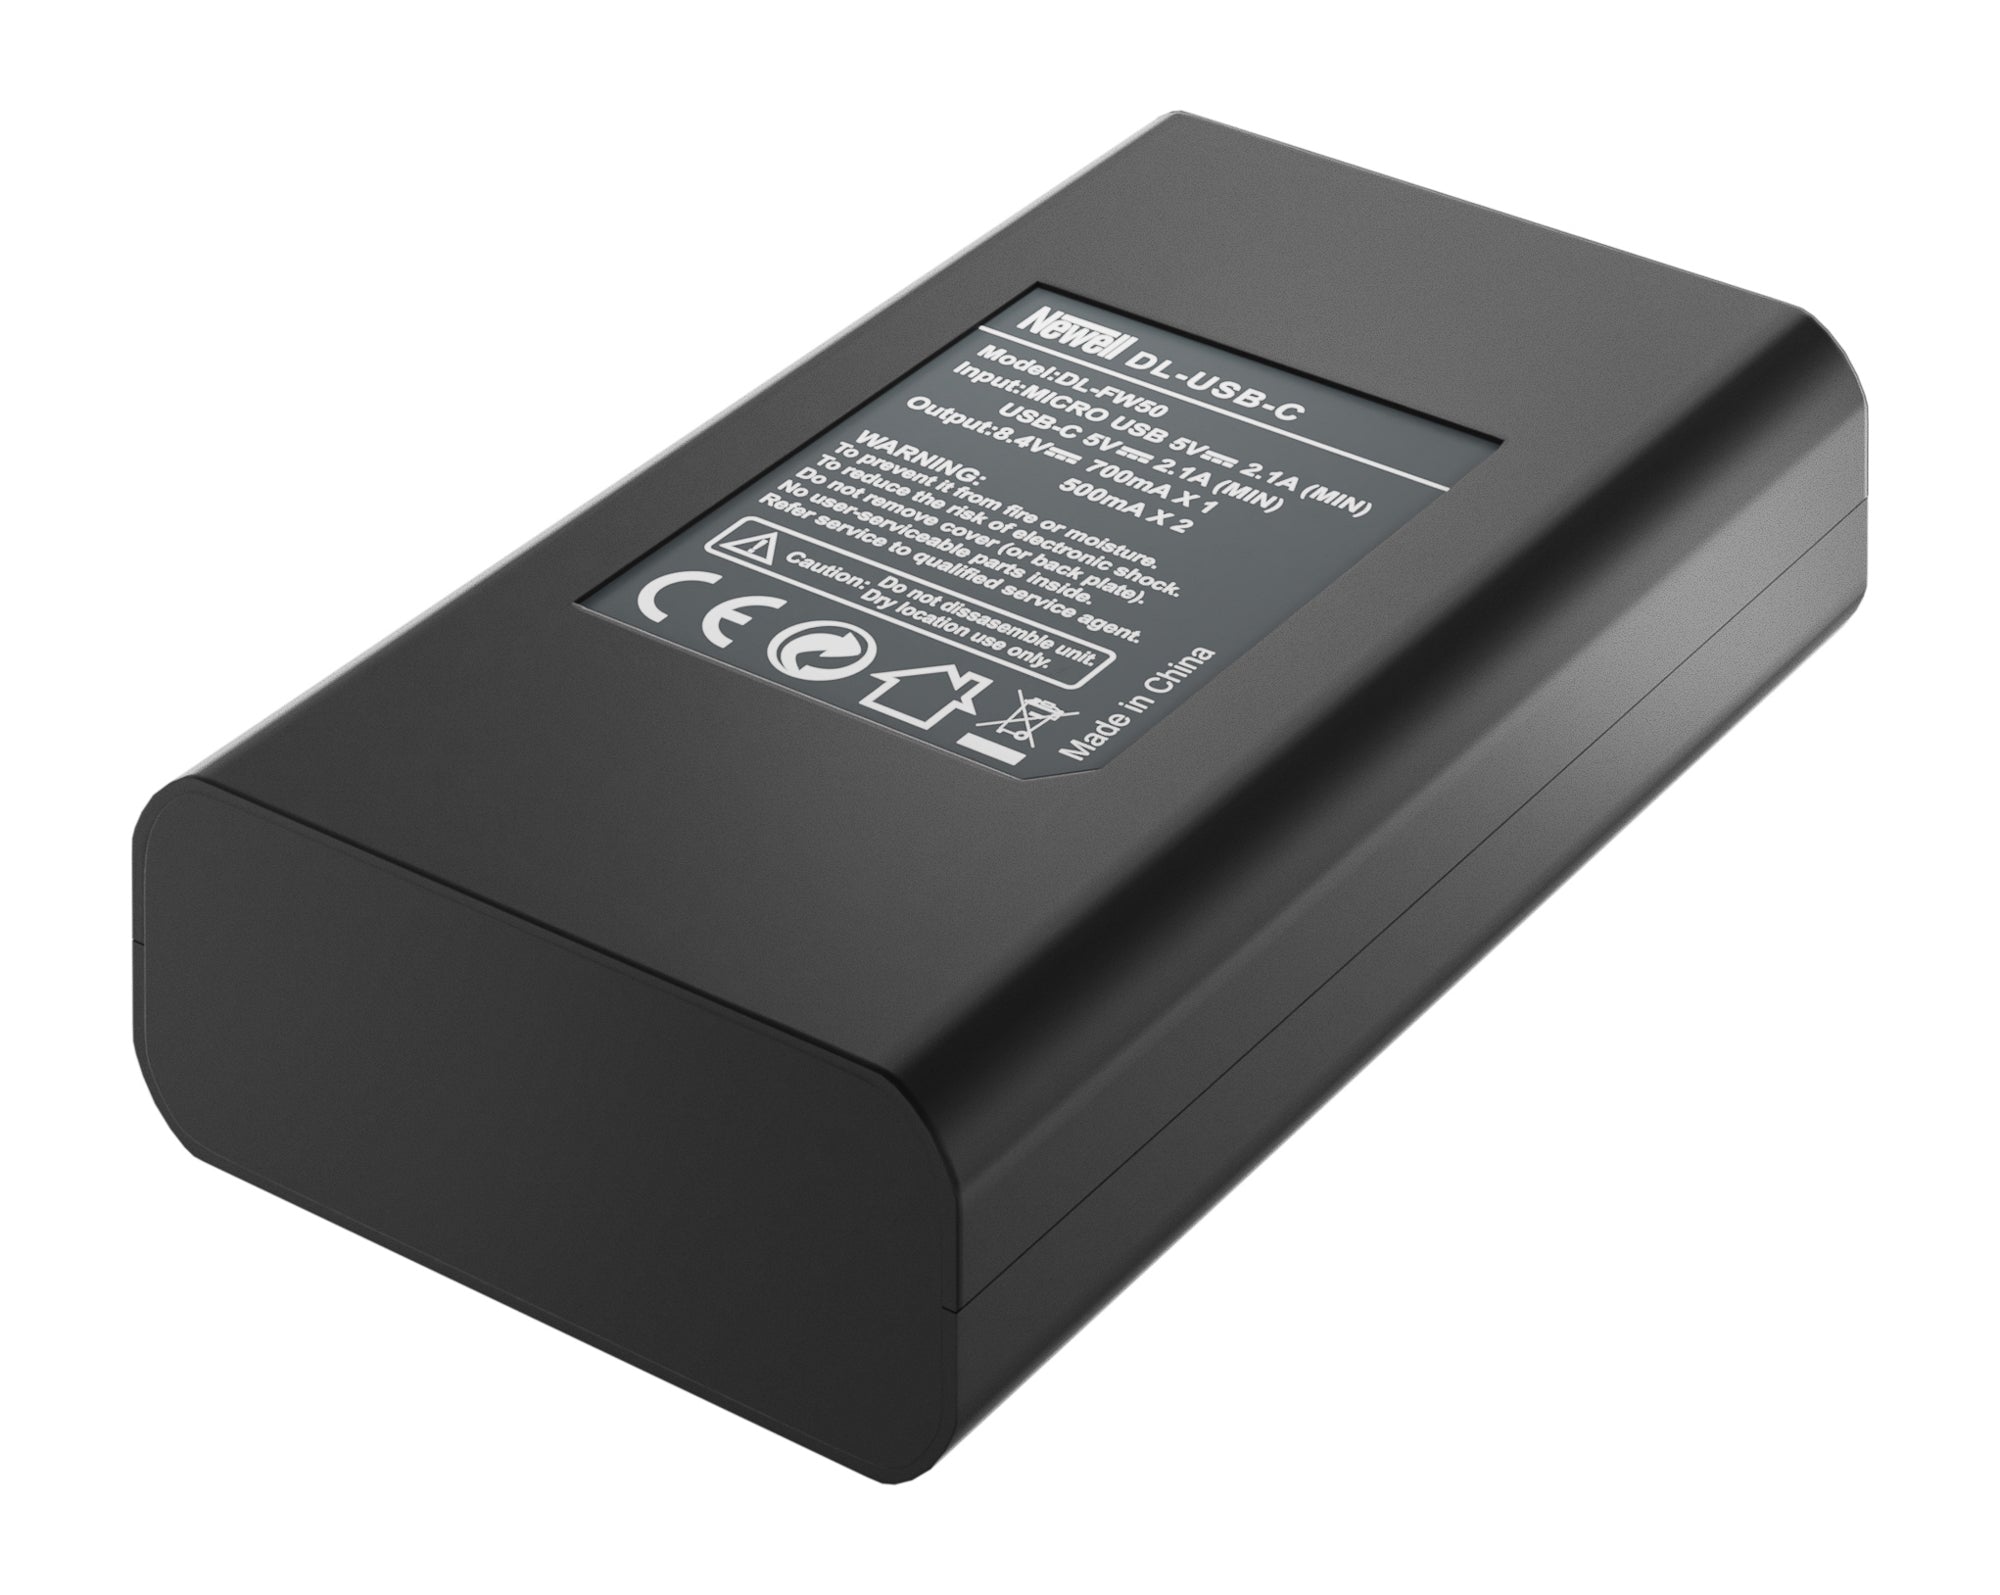 Newell DL-USB-C charger and 2x NP-FW50 batteries for Sony